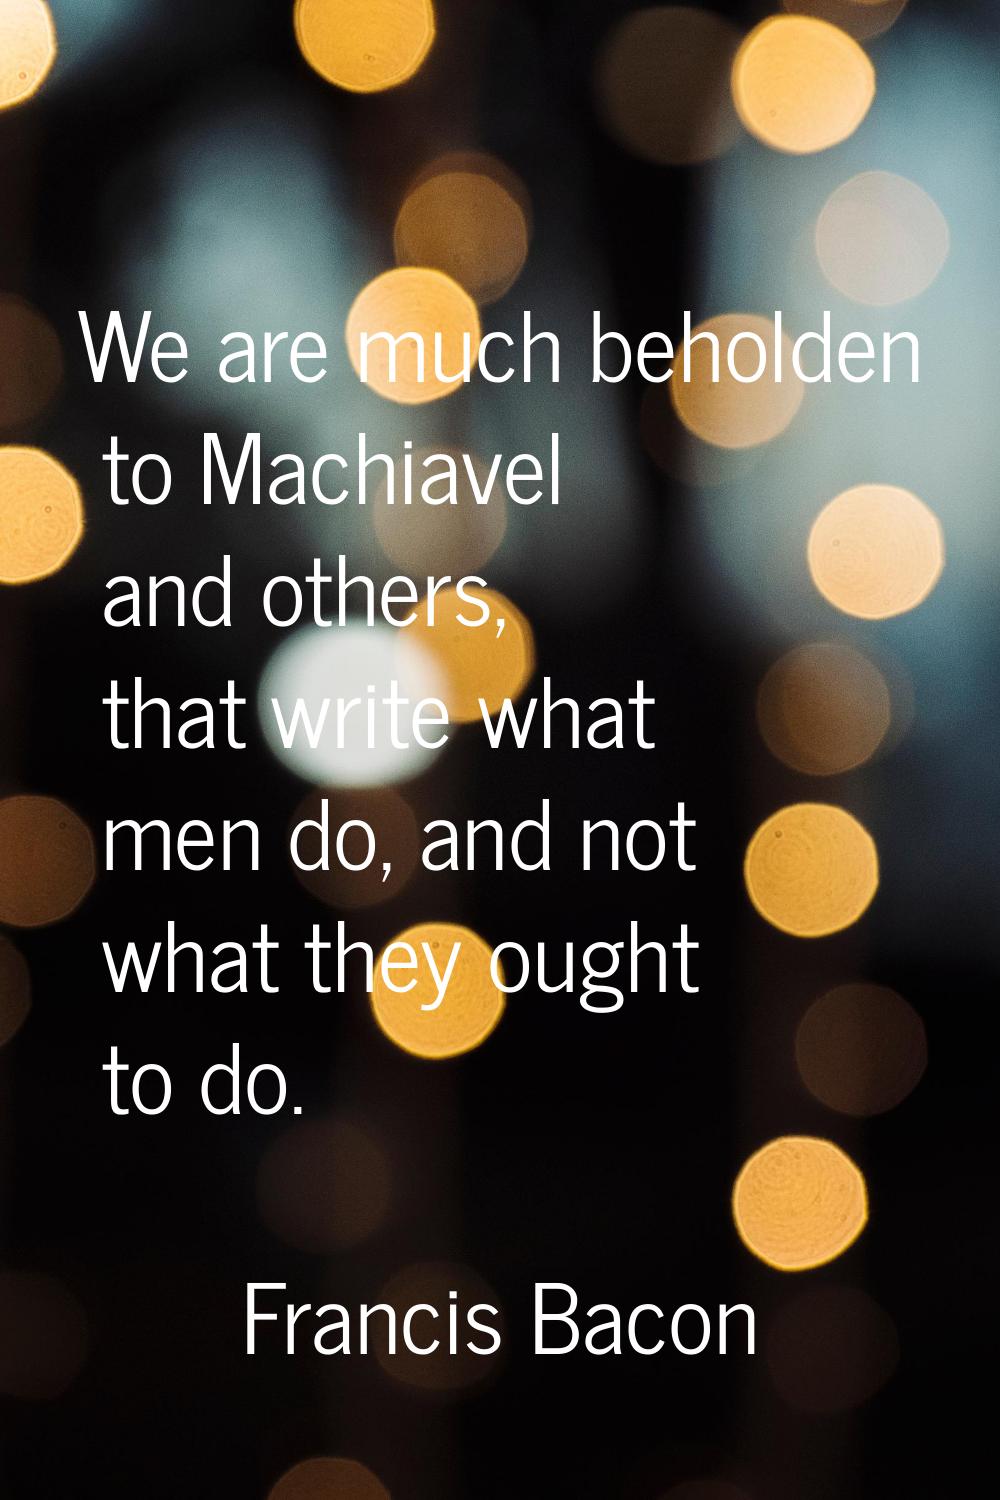 We are much beholden to Machiavel and others, that write what men do, and not what they ought to do